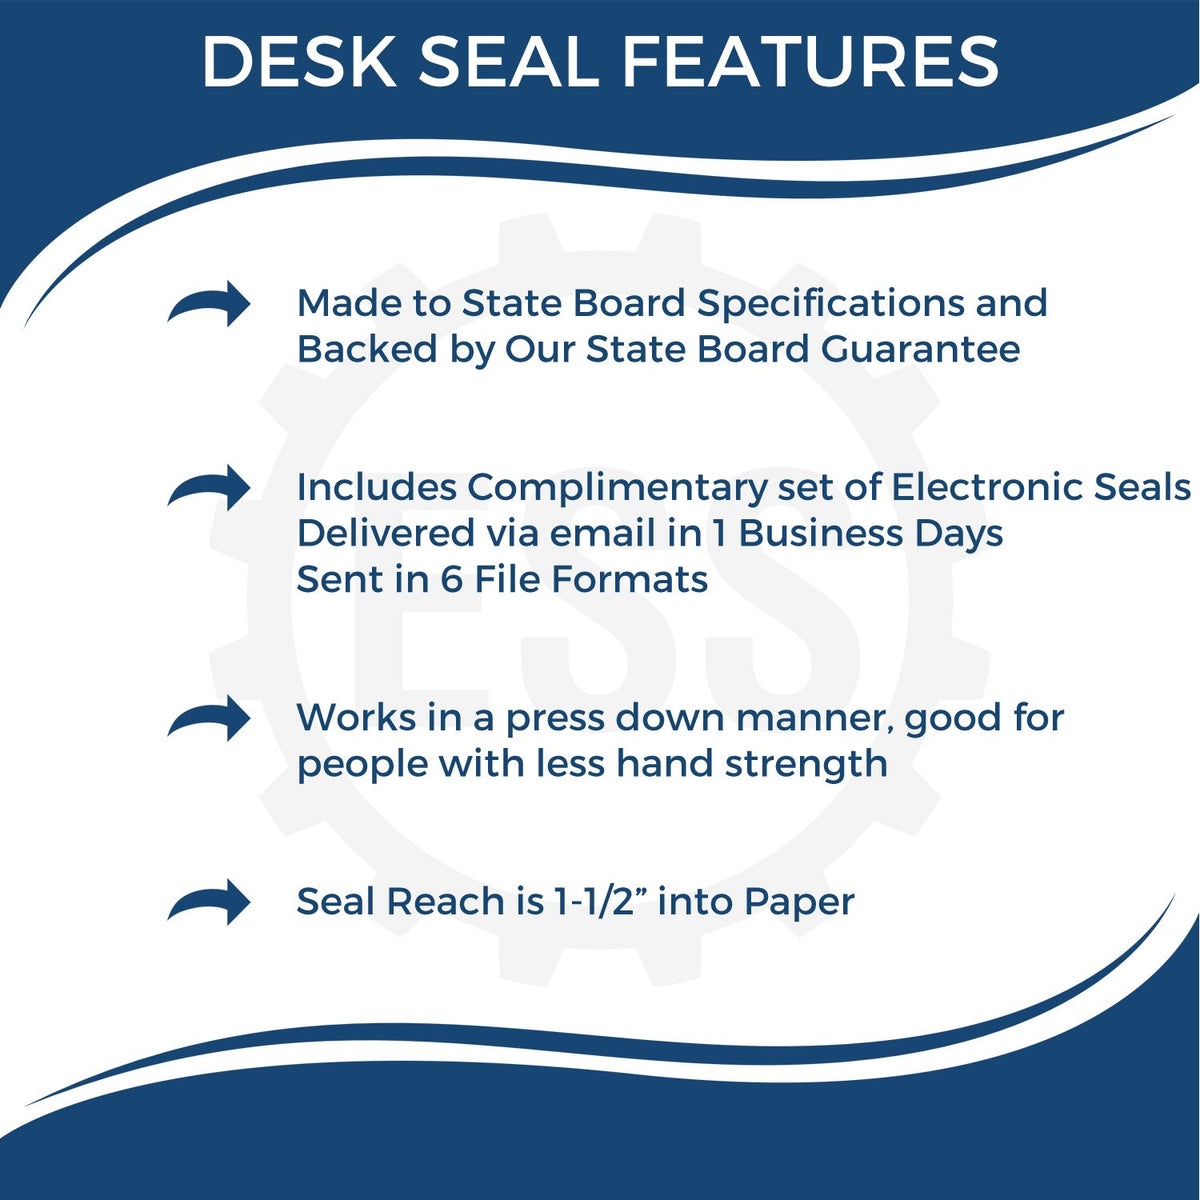 A picture of an infographic highlighting the selling points for the Idaho Desk Architect Embossing Seal